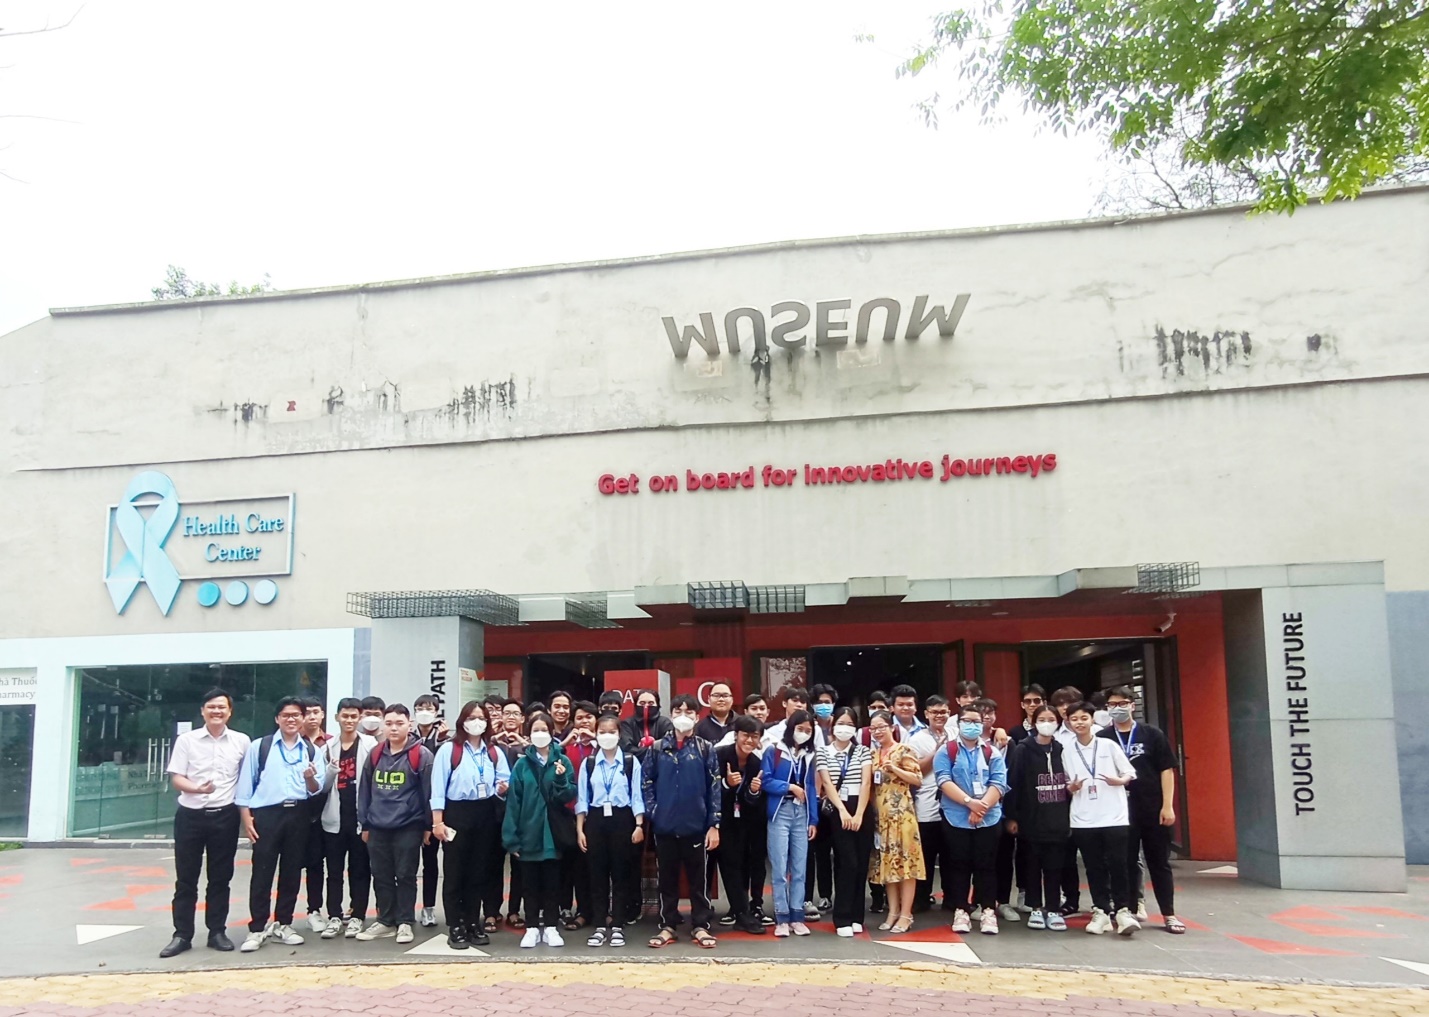 Students took souvenir photo in front of the museum